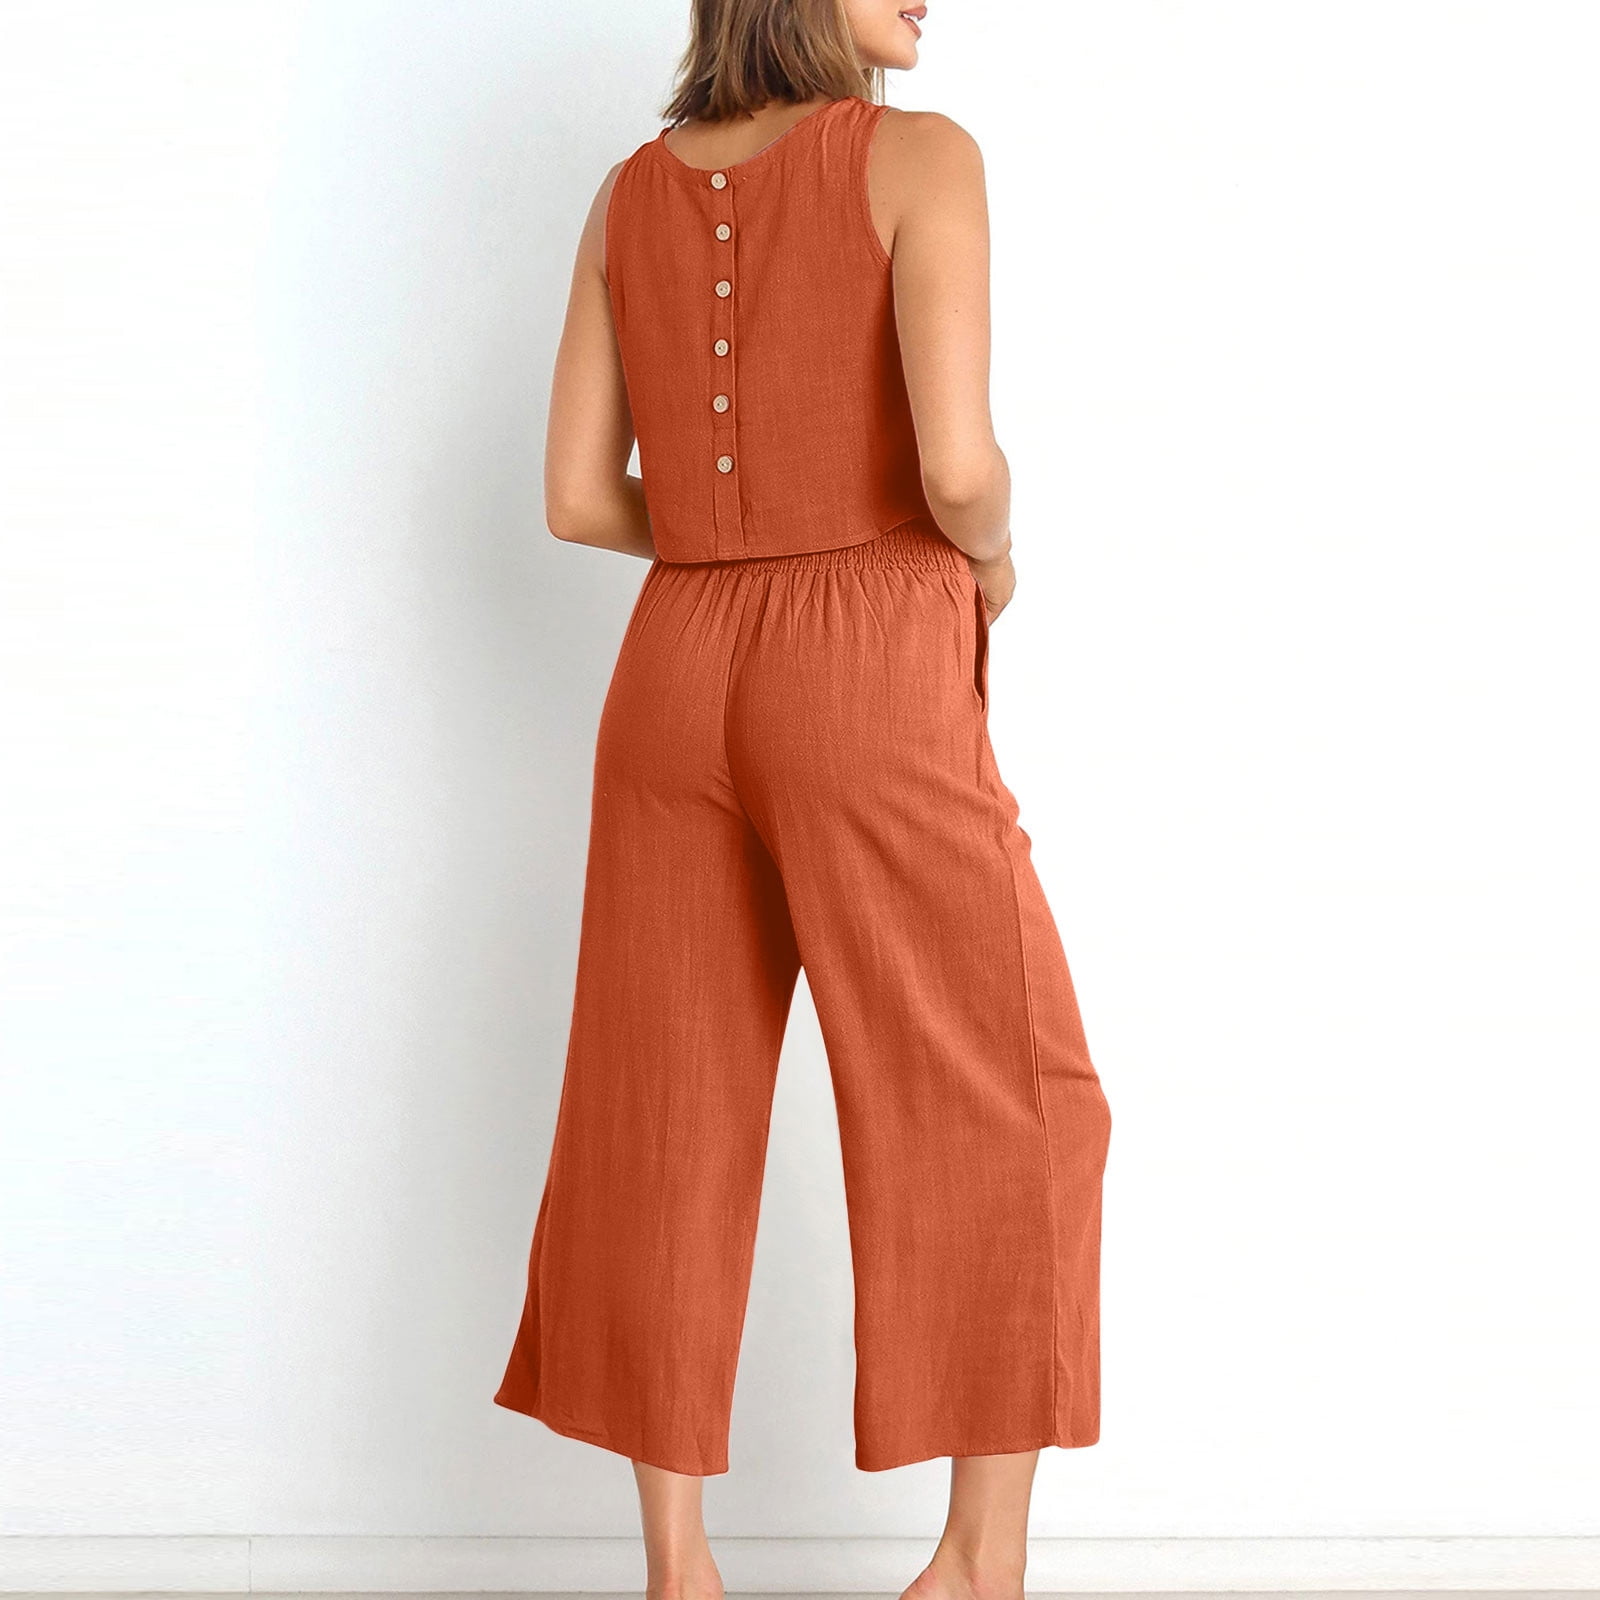 Summer Casual Cotton Conference 2022 Capri For Women Loose Fit Harem Pants  With Knee Length Design LY191210 From Dang02, $13.13